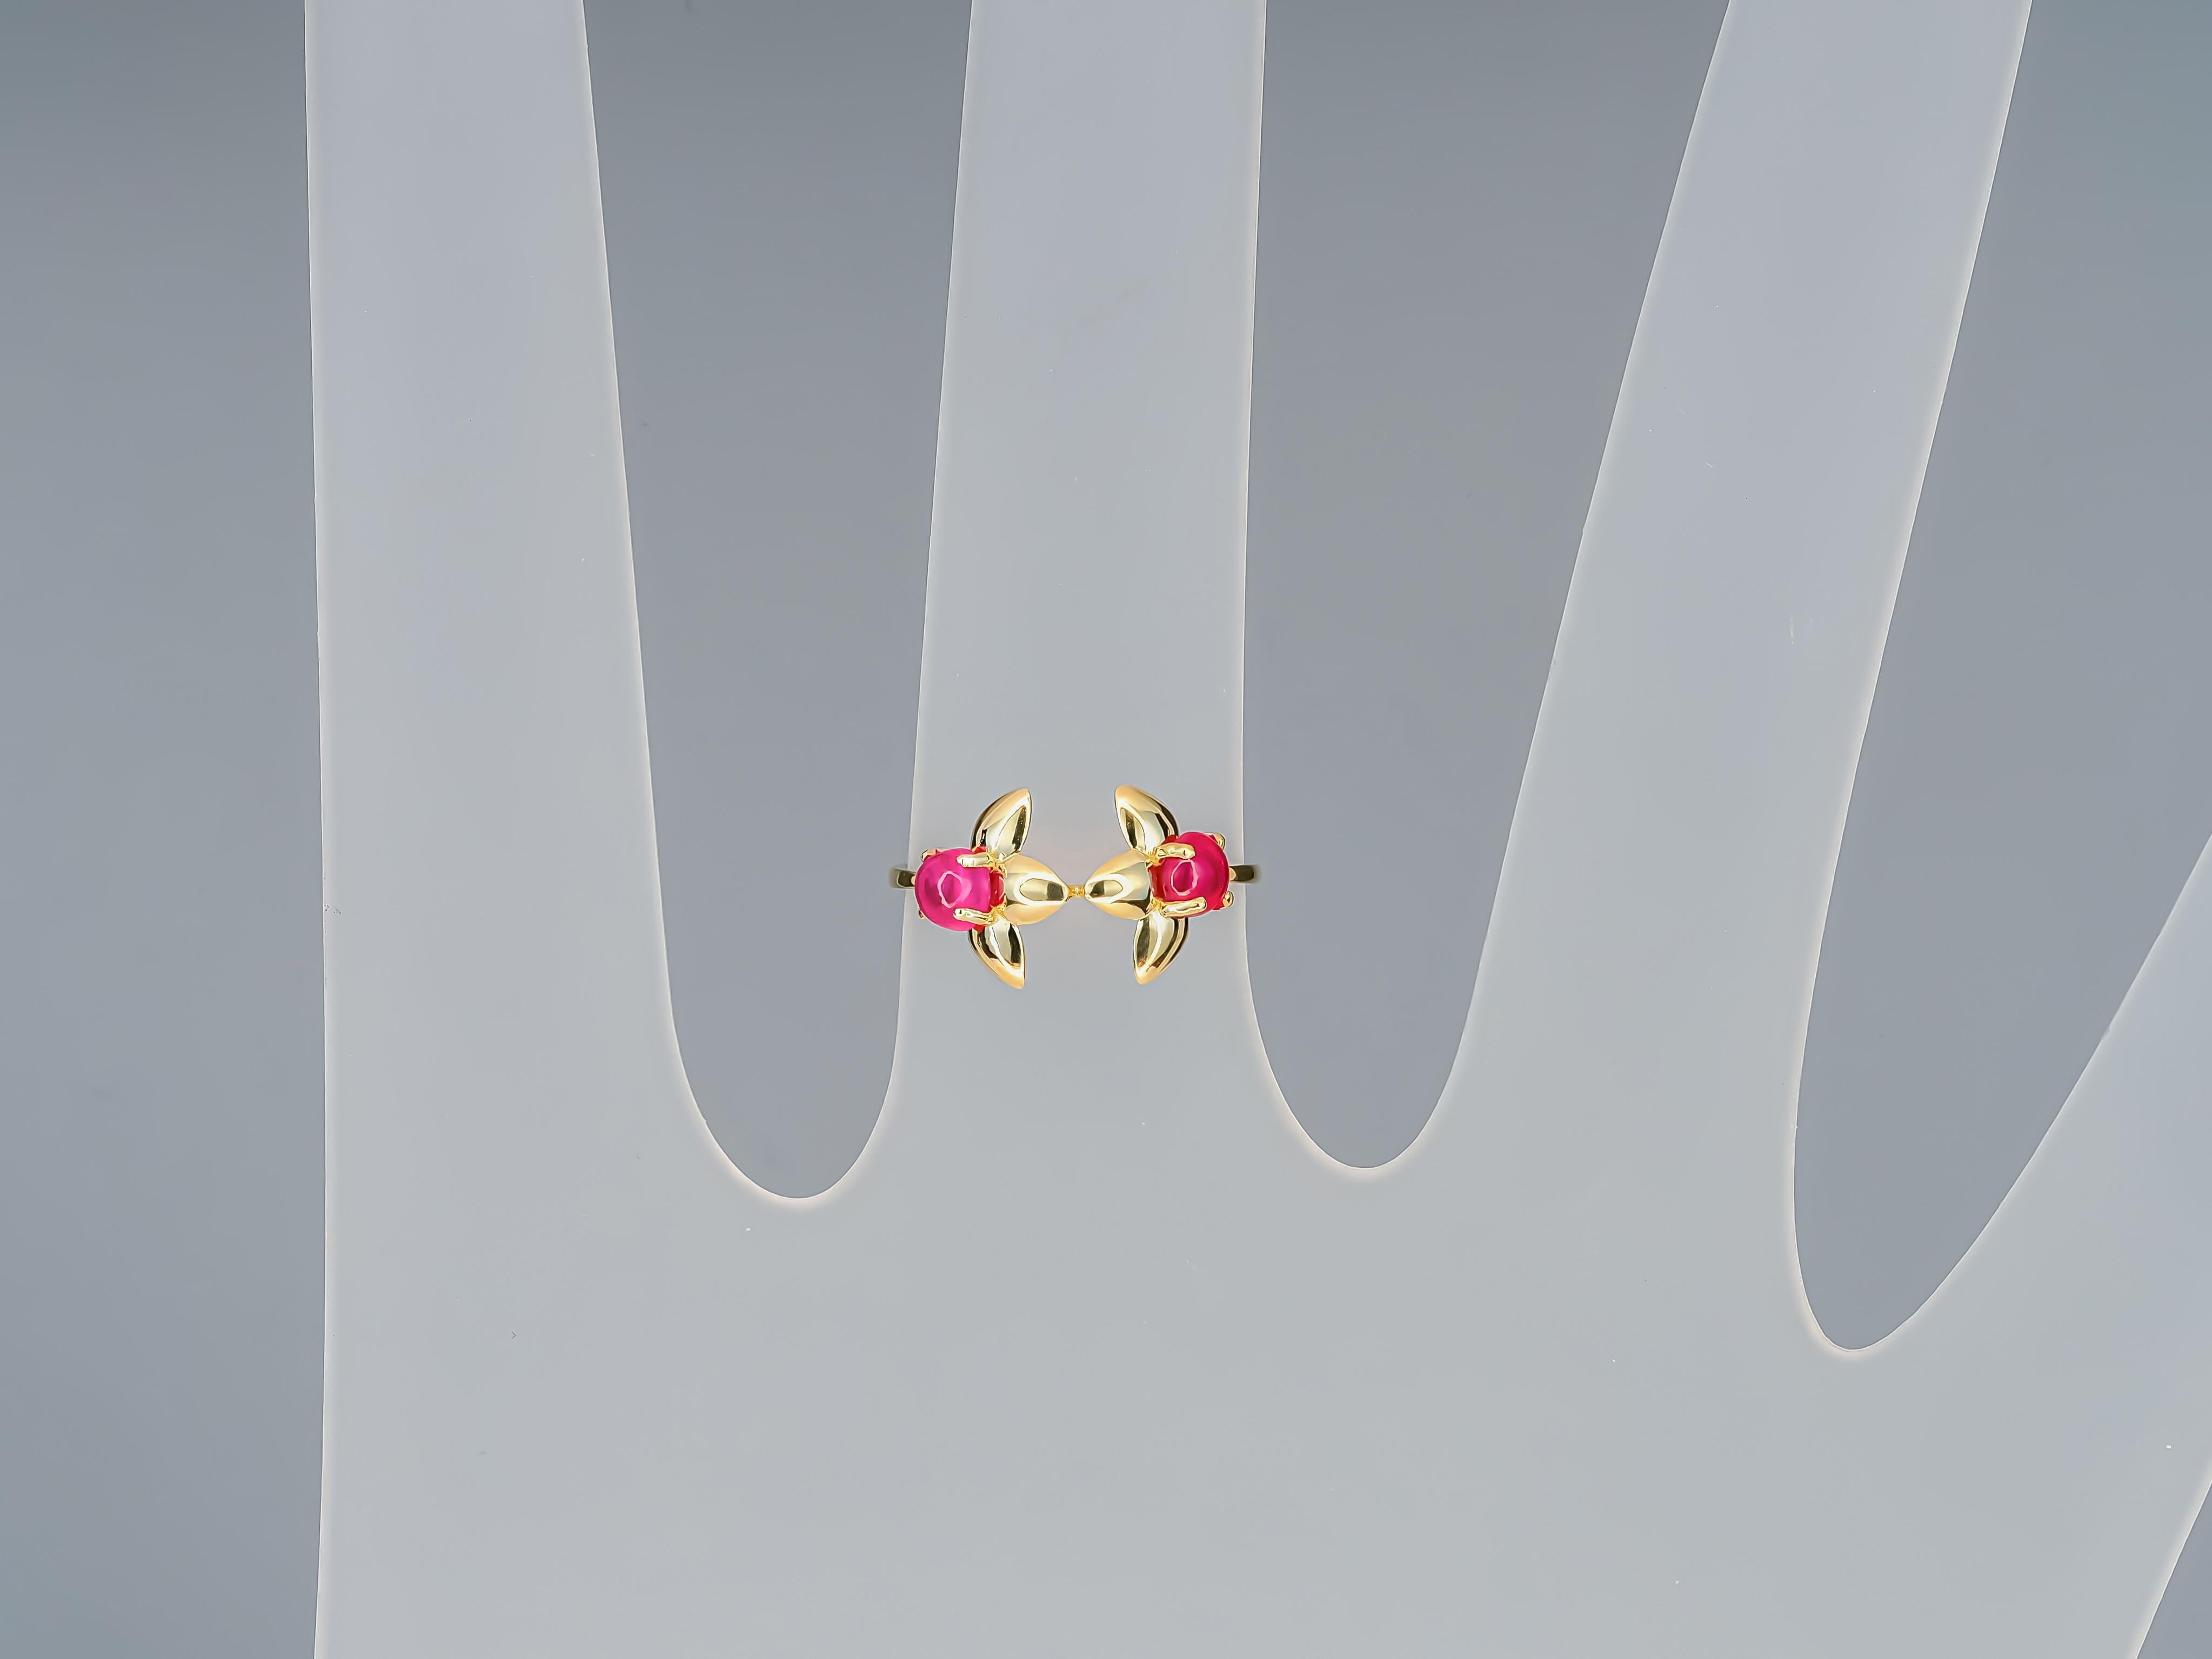 14 Karat Gold Ring with 2 Rubies, Flower Gold Ring. July birthstone ruby ring 1